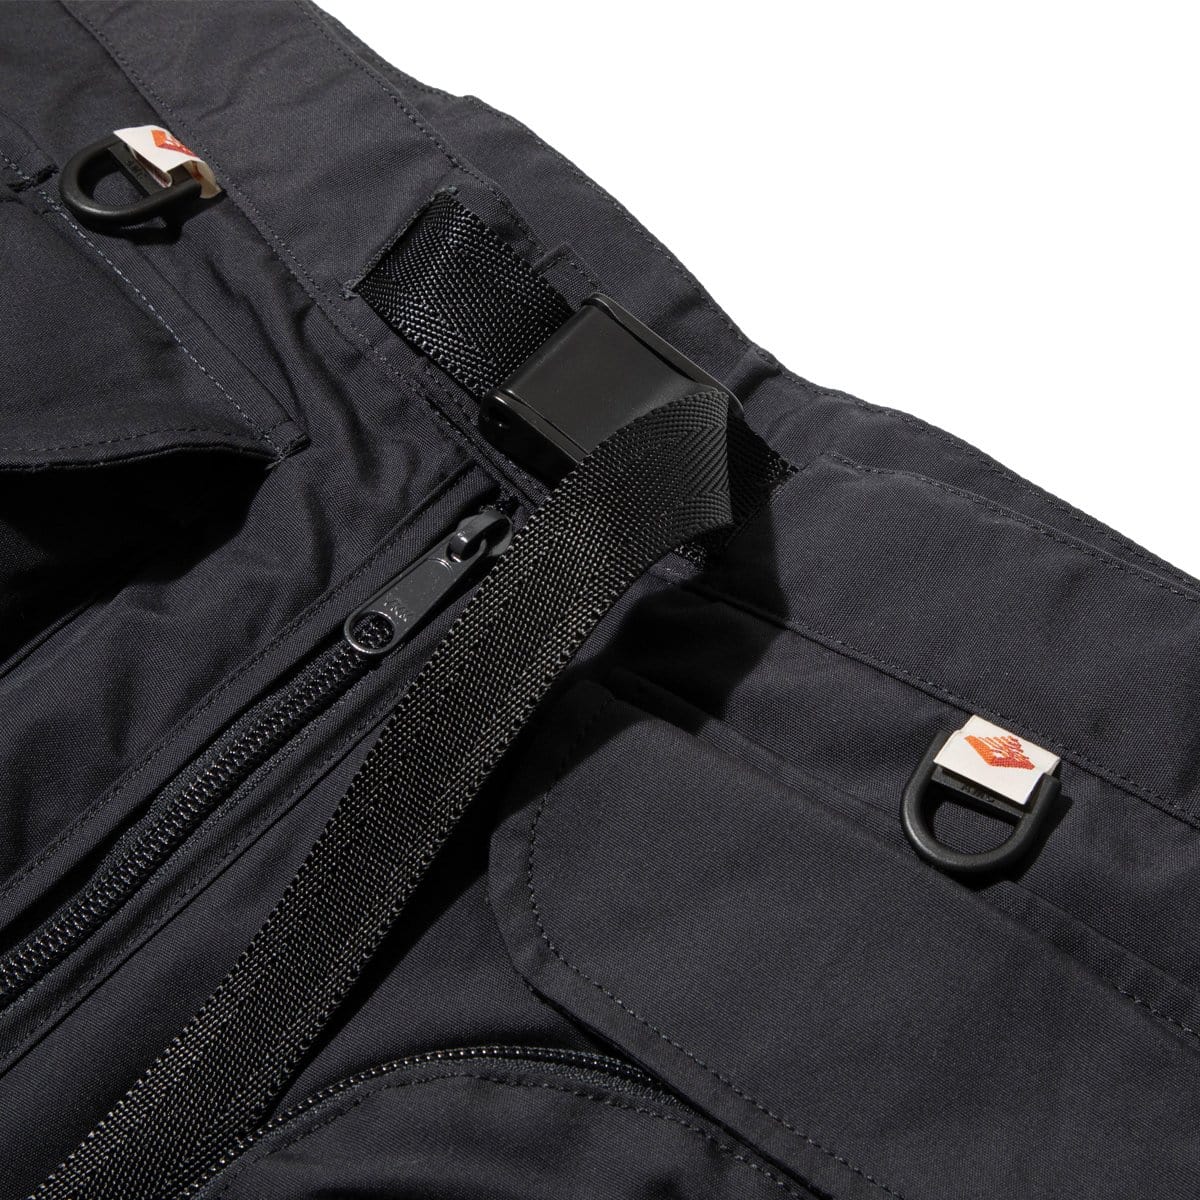 Mountain Research Bottoms FISHING TROUSERS